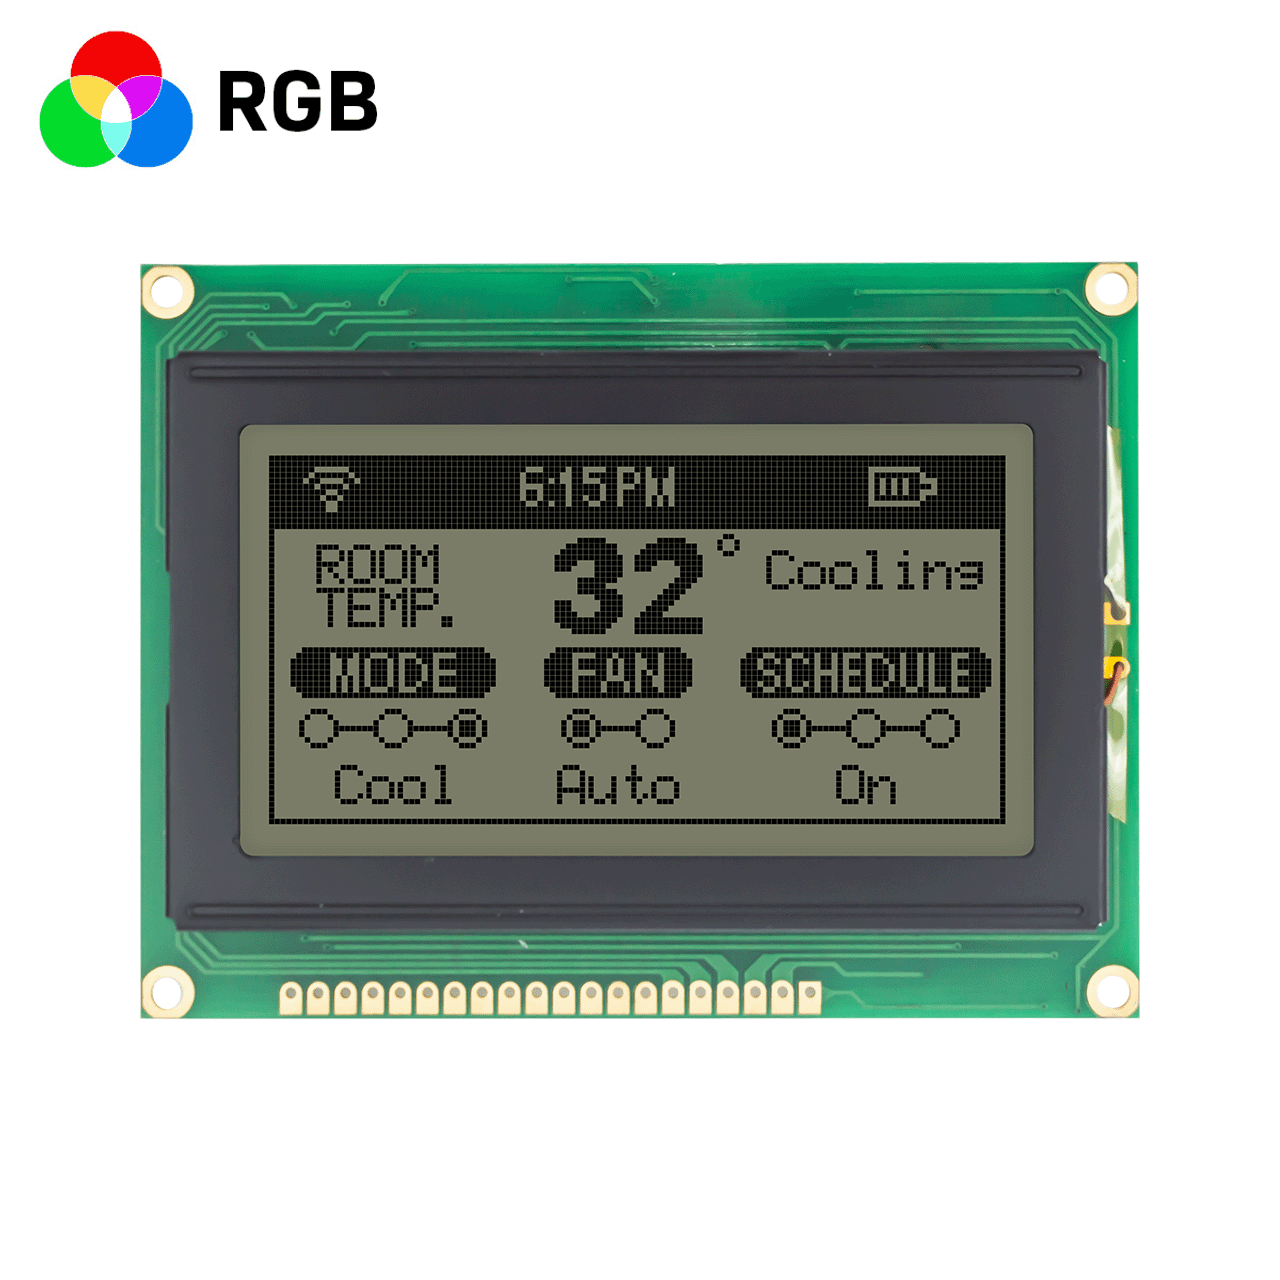 3.2"Low price 128x64 RGB red, green and blue mode/graphic COB LCD module/supports 5V/FSTN positive display at the same time/KS0107+KS0108 or compatible